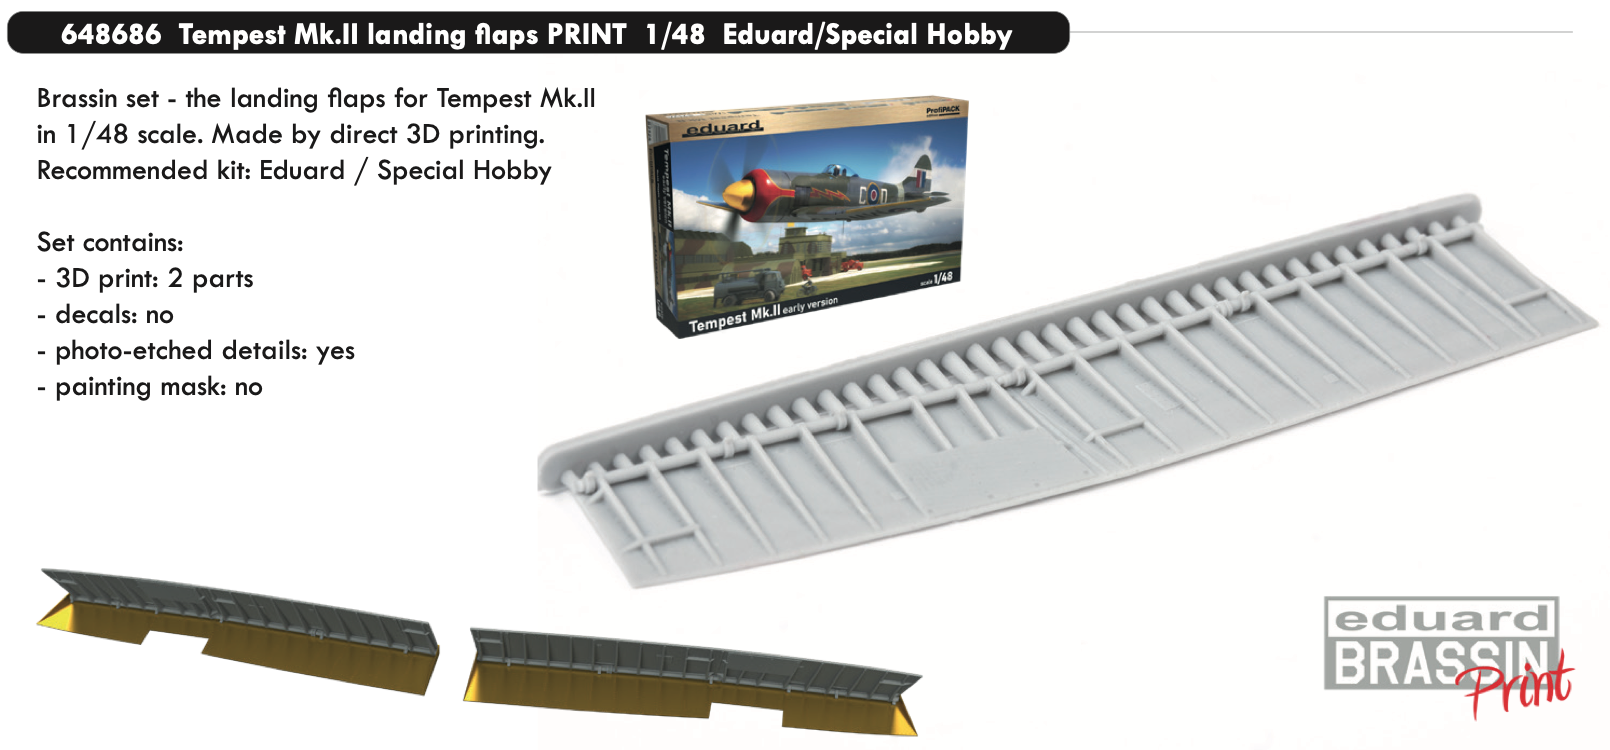 Additions (3D resin printing) 1/48 Hawker Tempest Mk.II landing flaps 3D-Printed (designed to be used with Eduard kits and Special Hobby kits) 